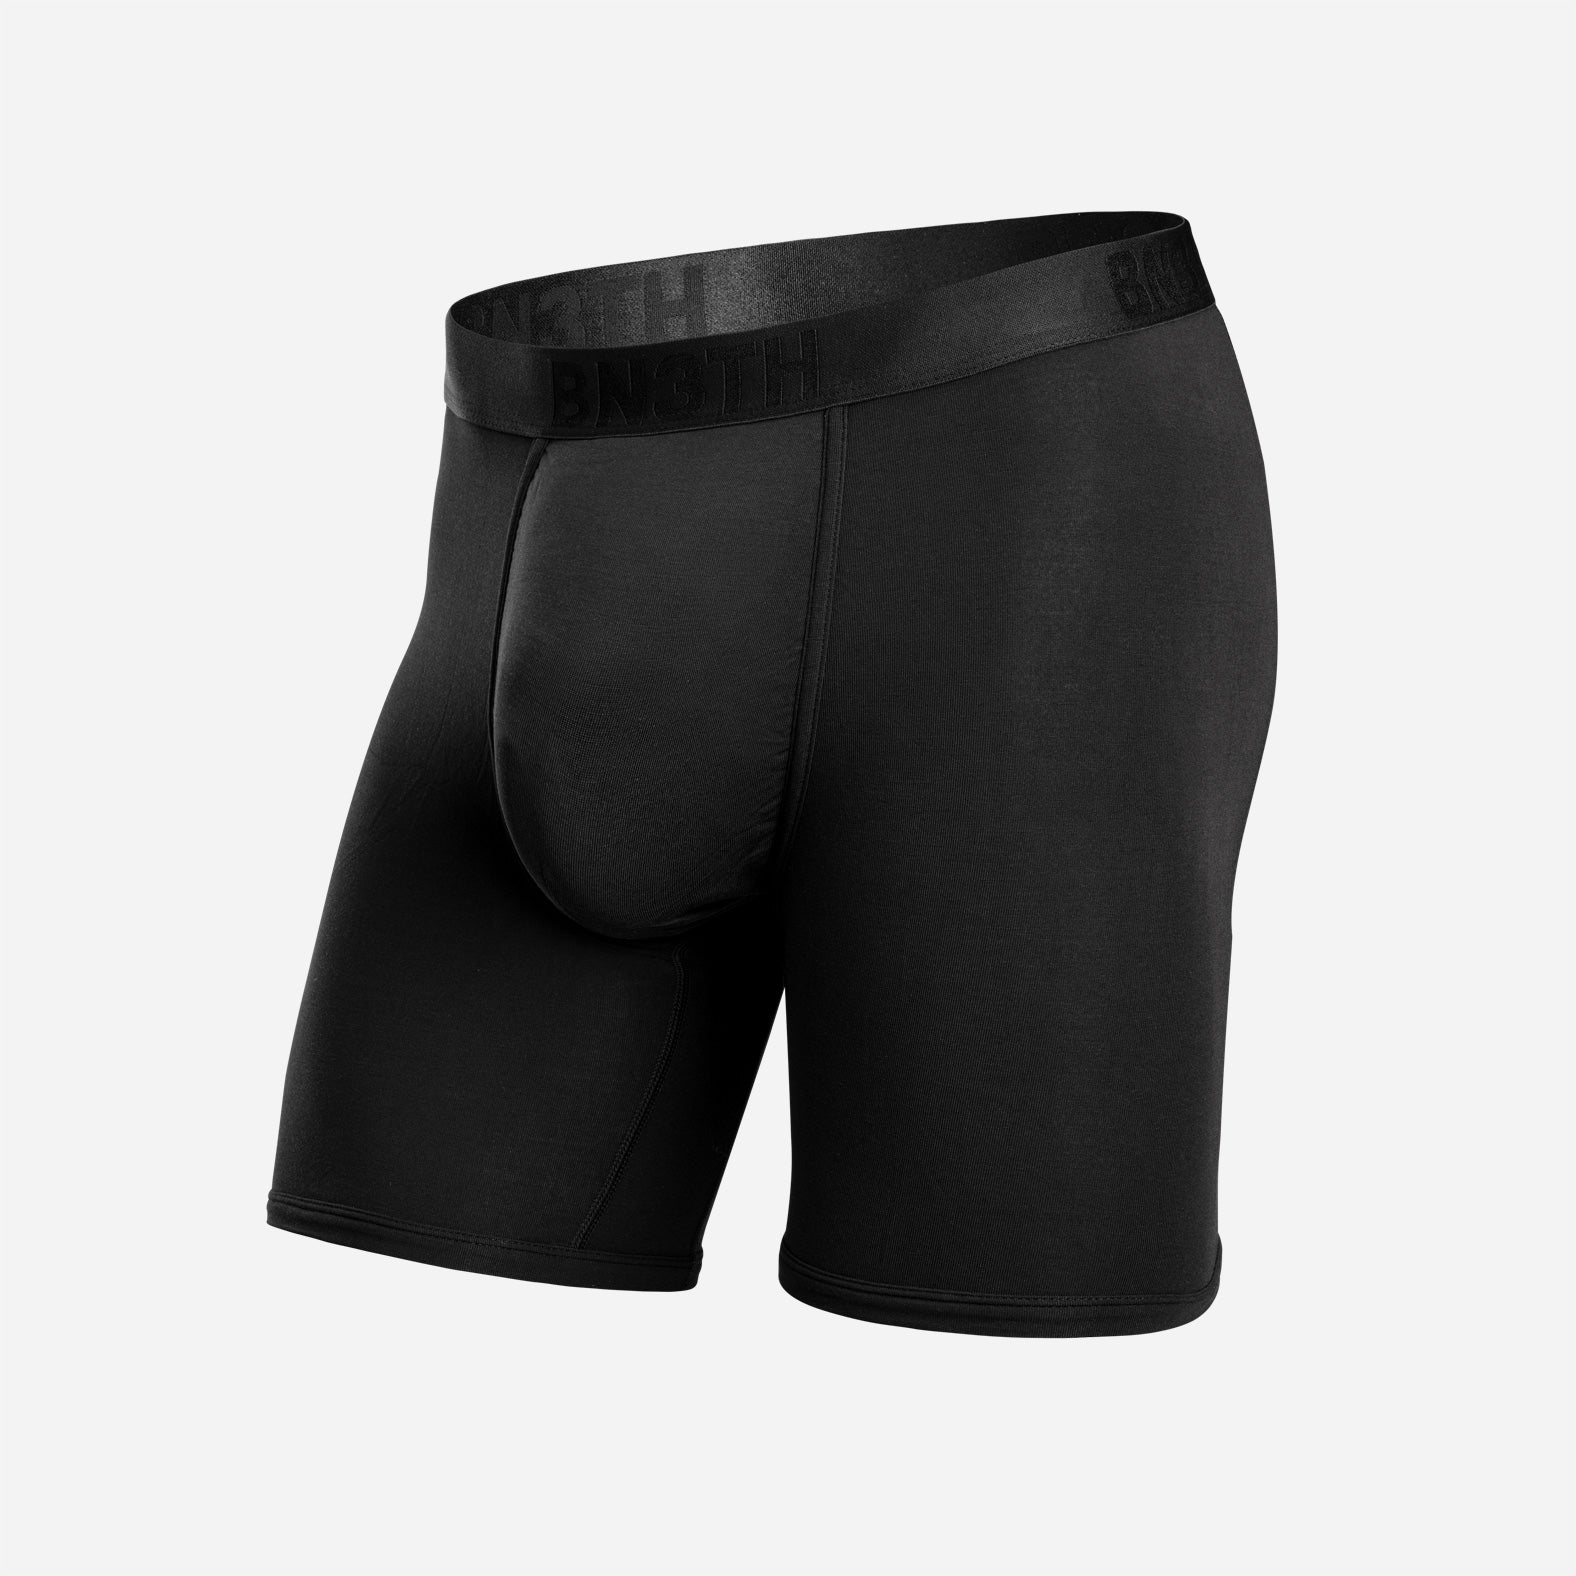 BN3TH Classic Boxer Brief + Fly - Men's - Clothing